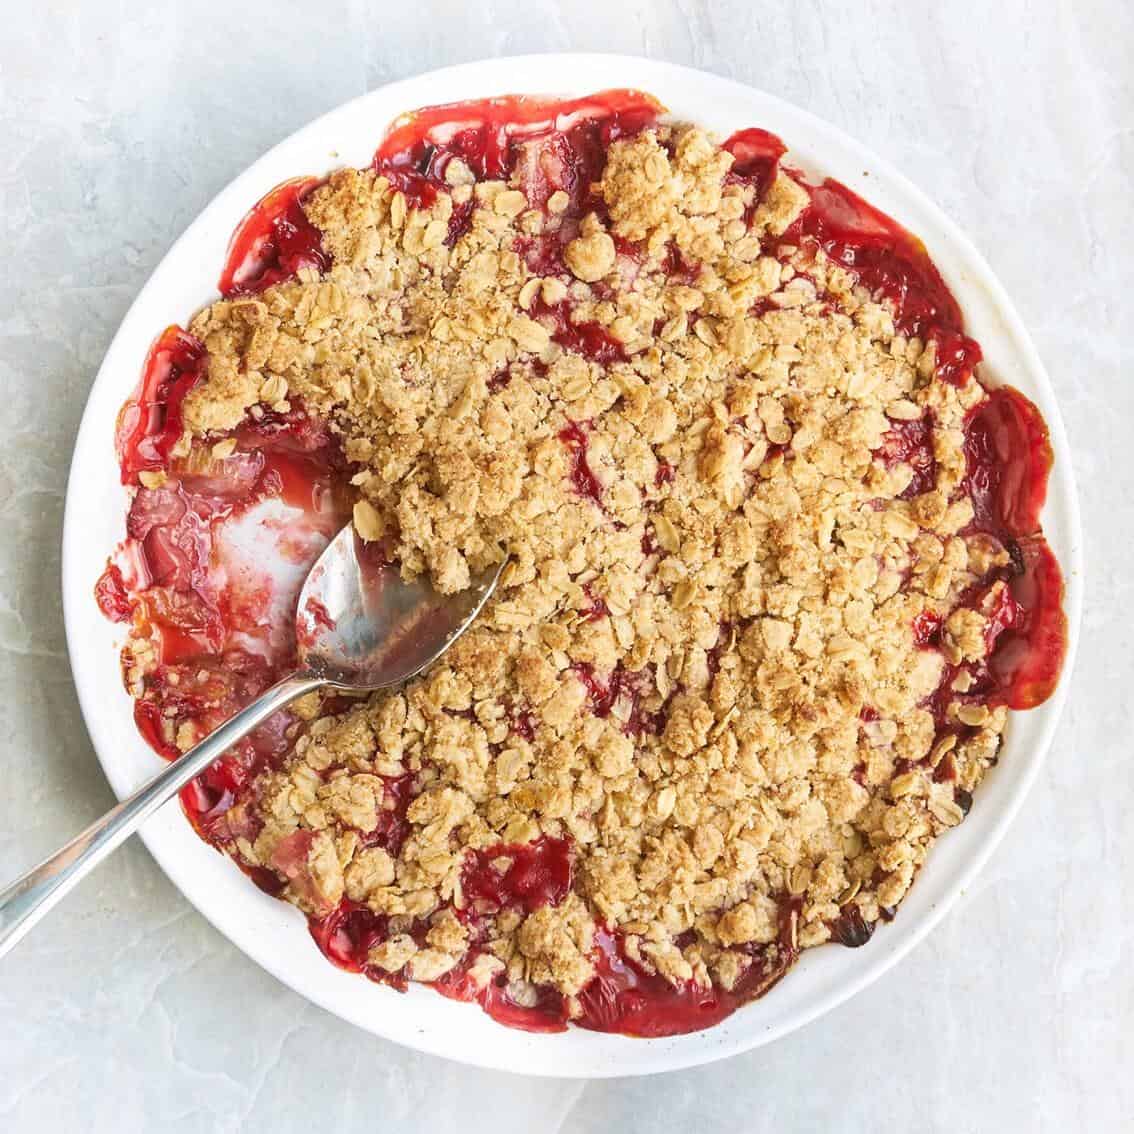  This recipe is the perfect way to use up an abundance of fresh rhubarb.